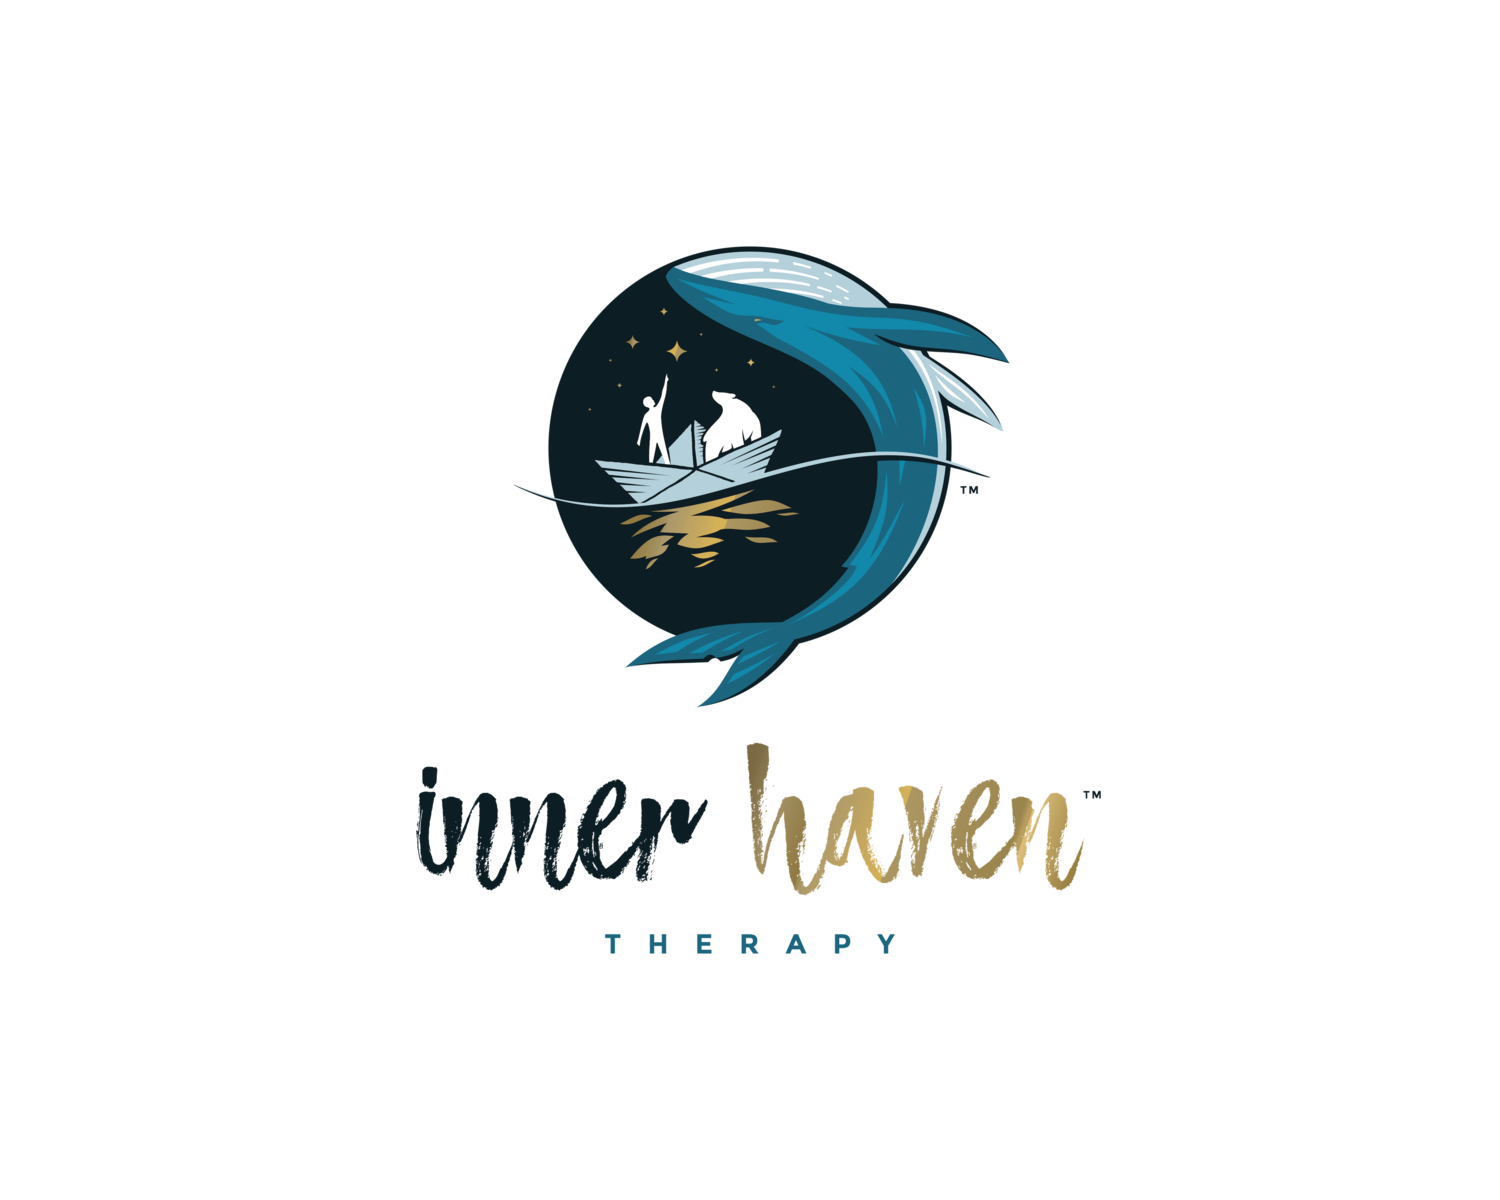 inner haven therapy  